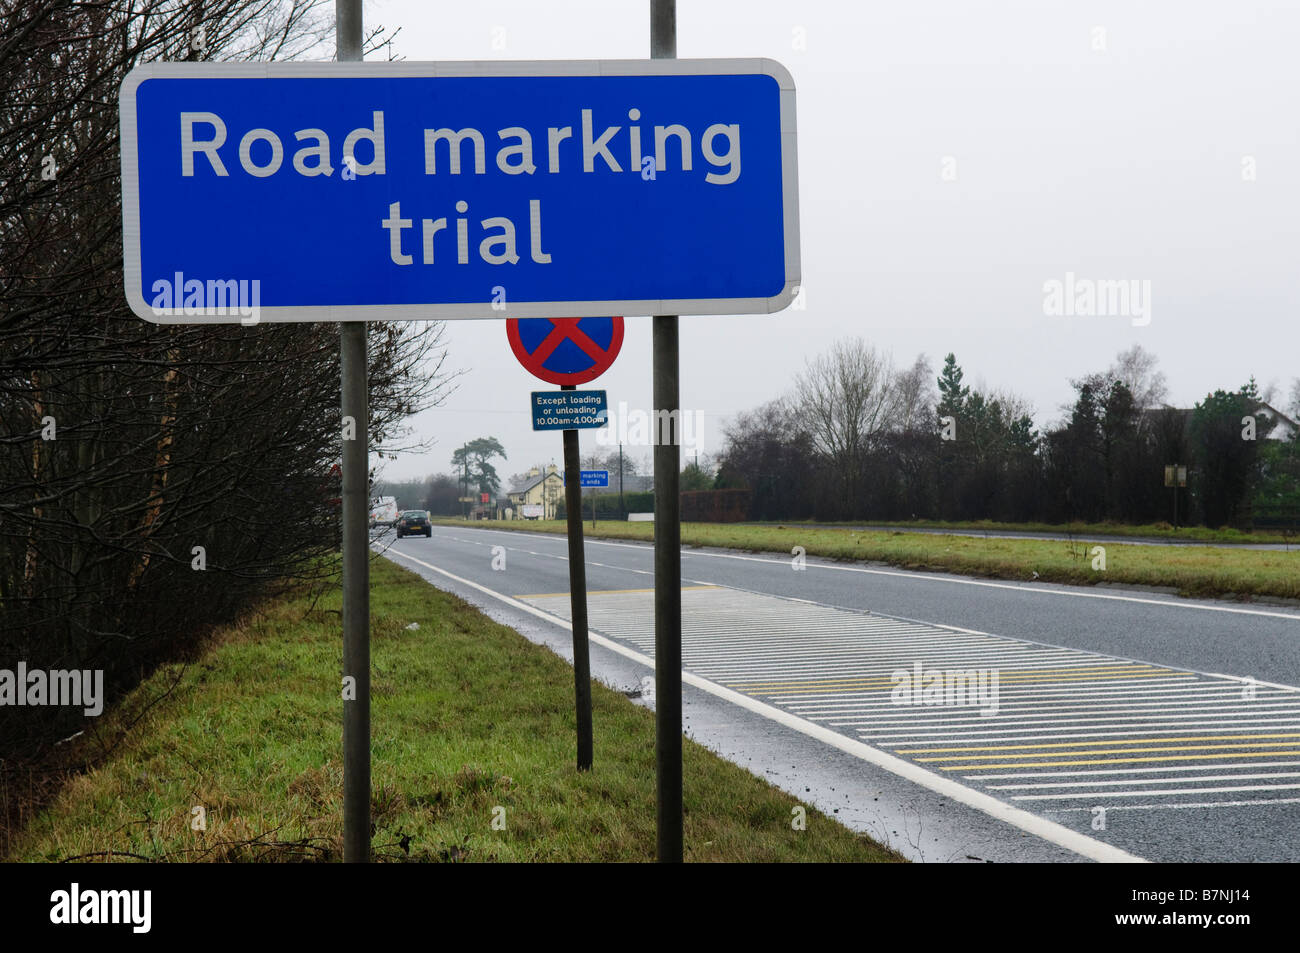 Road sign advising motorists of 'road marking trial', against overcast sky and rain Stock Photo